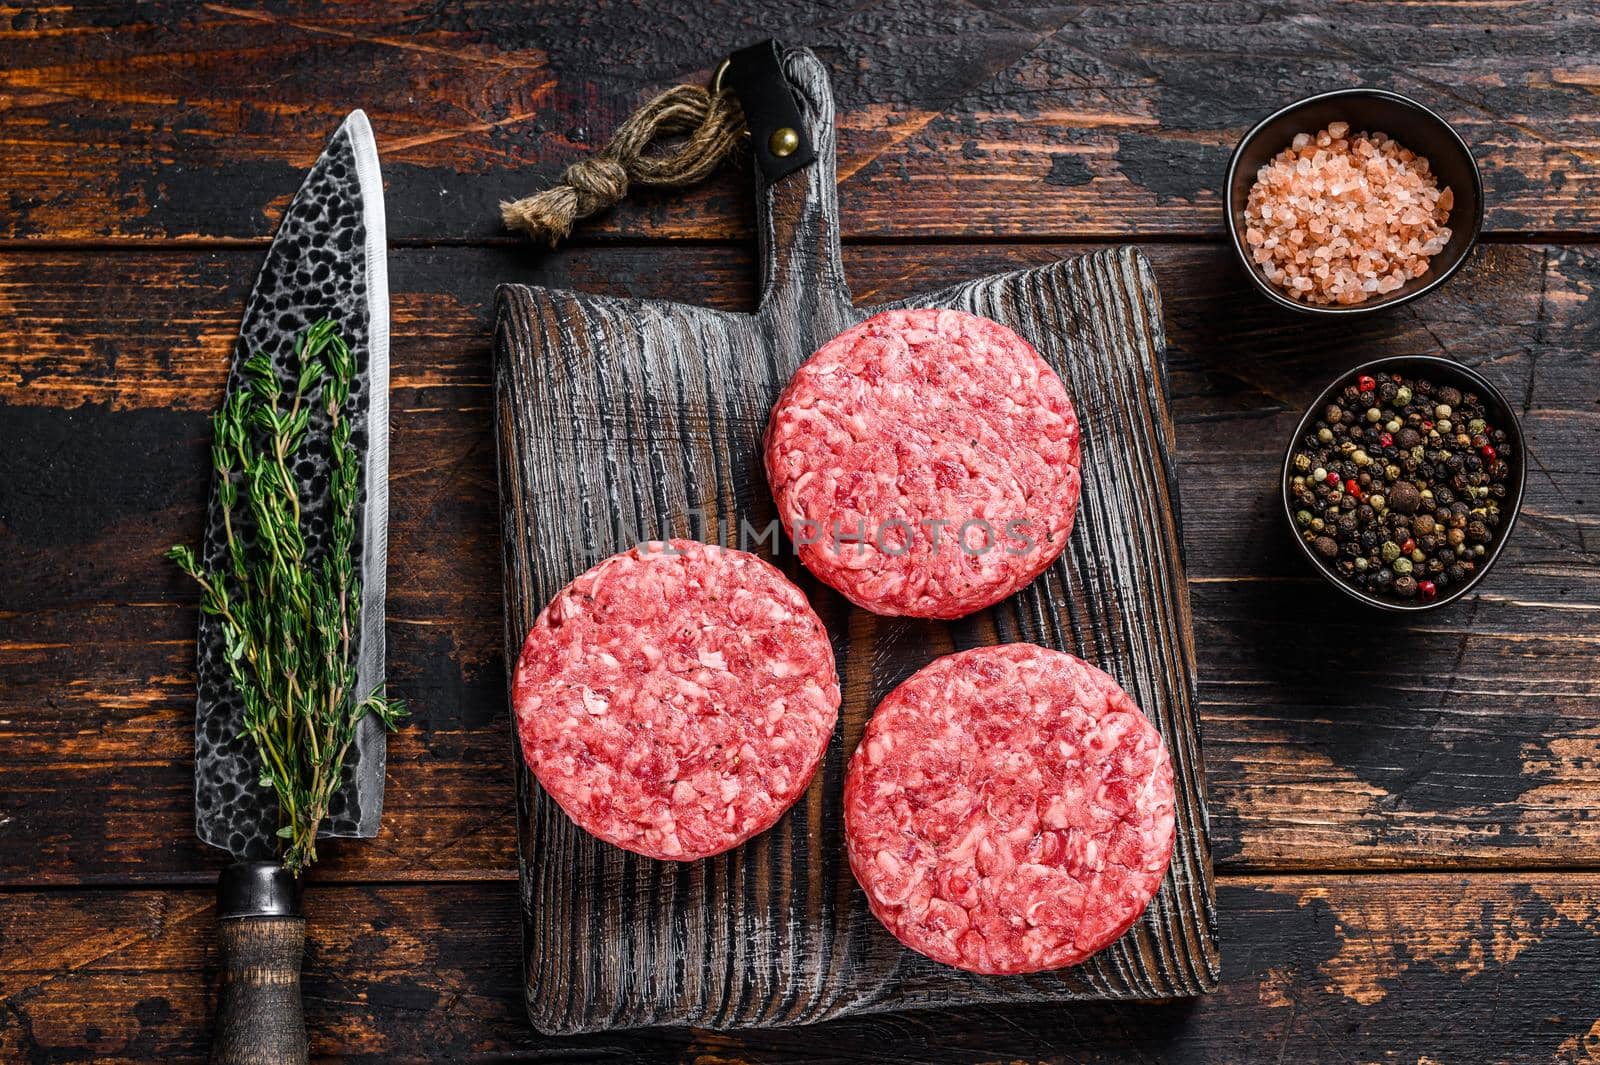 Raw steak burgers patties with ground beef and thyme on a wooden cutting board. Dark Wooden background. Top view by Composter